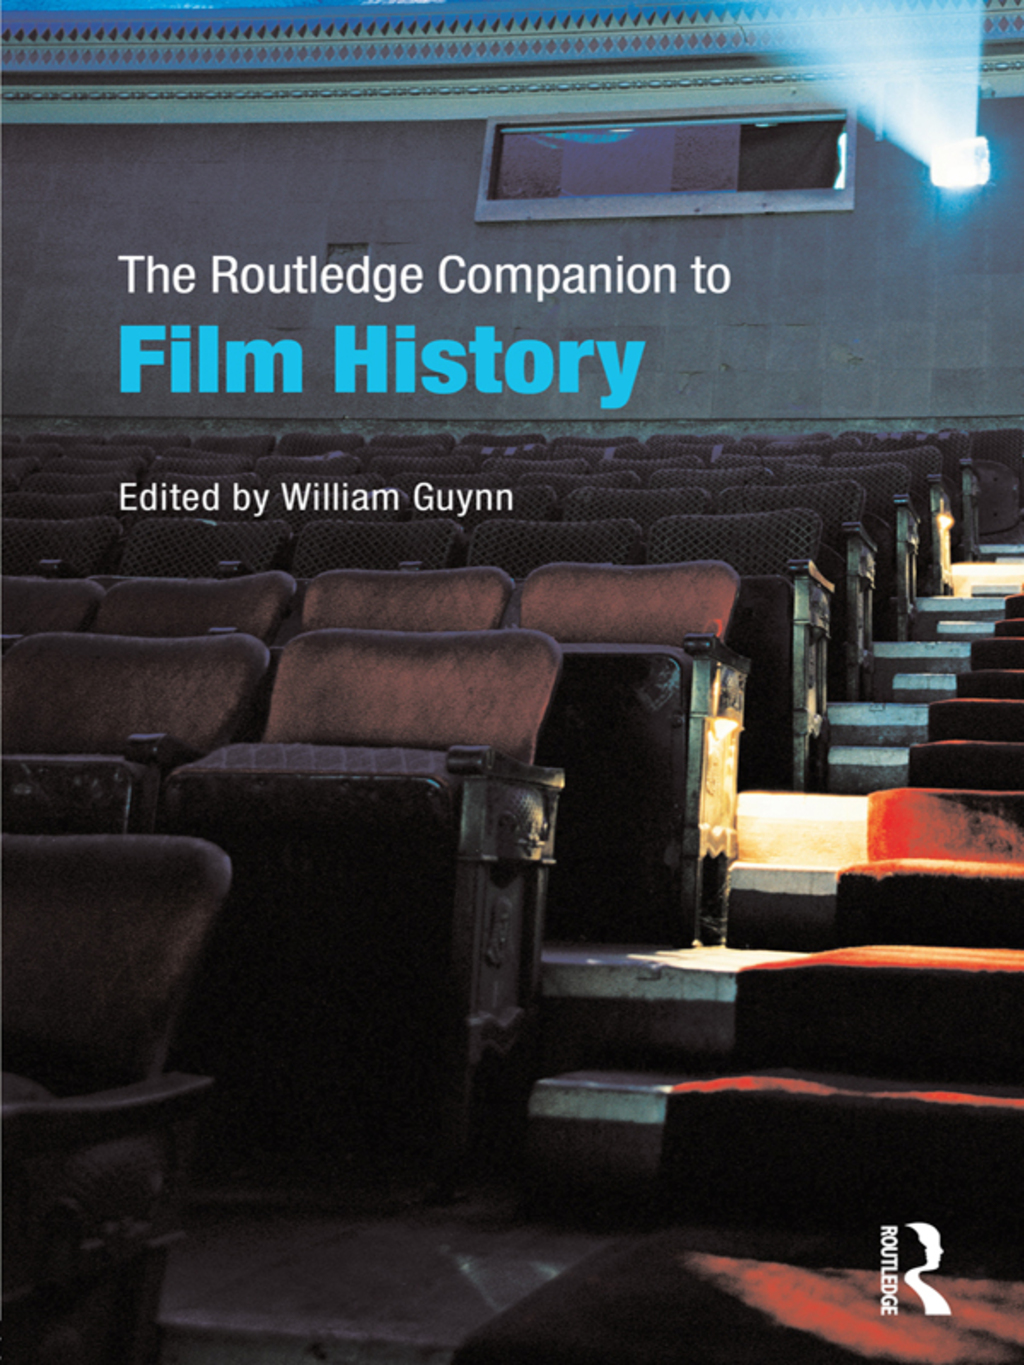 The Routledge Companion to Film History (eBook Rental)